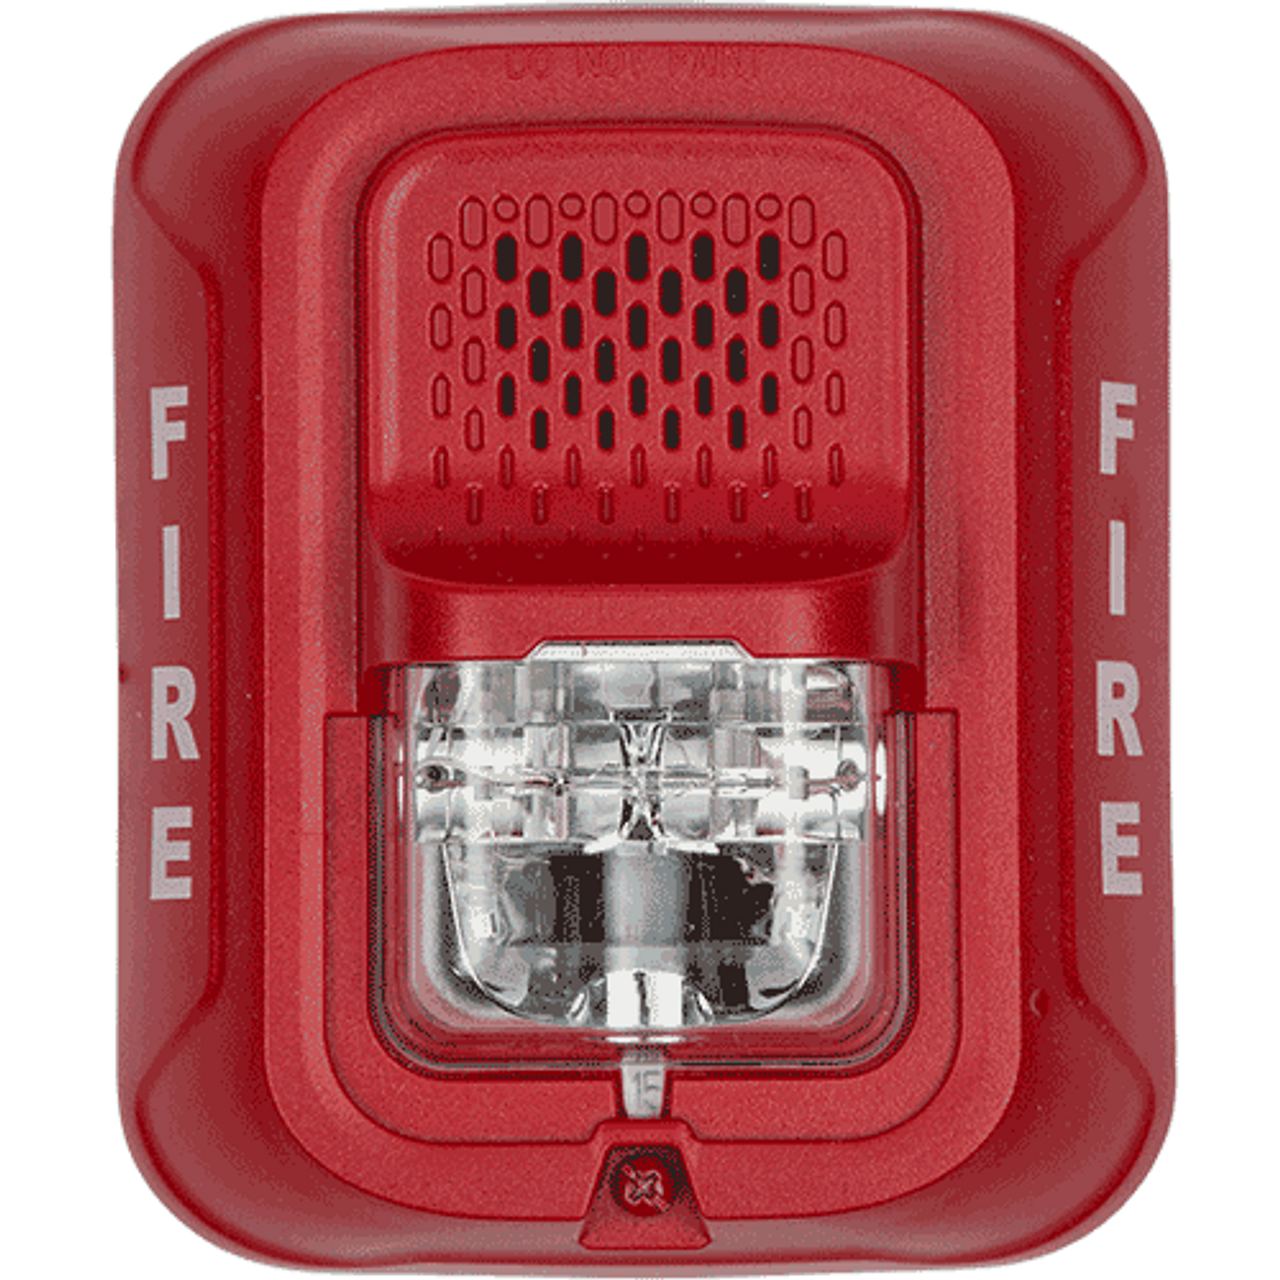 activated fire alarm strobe lights